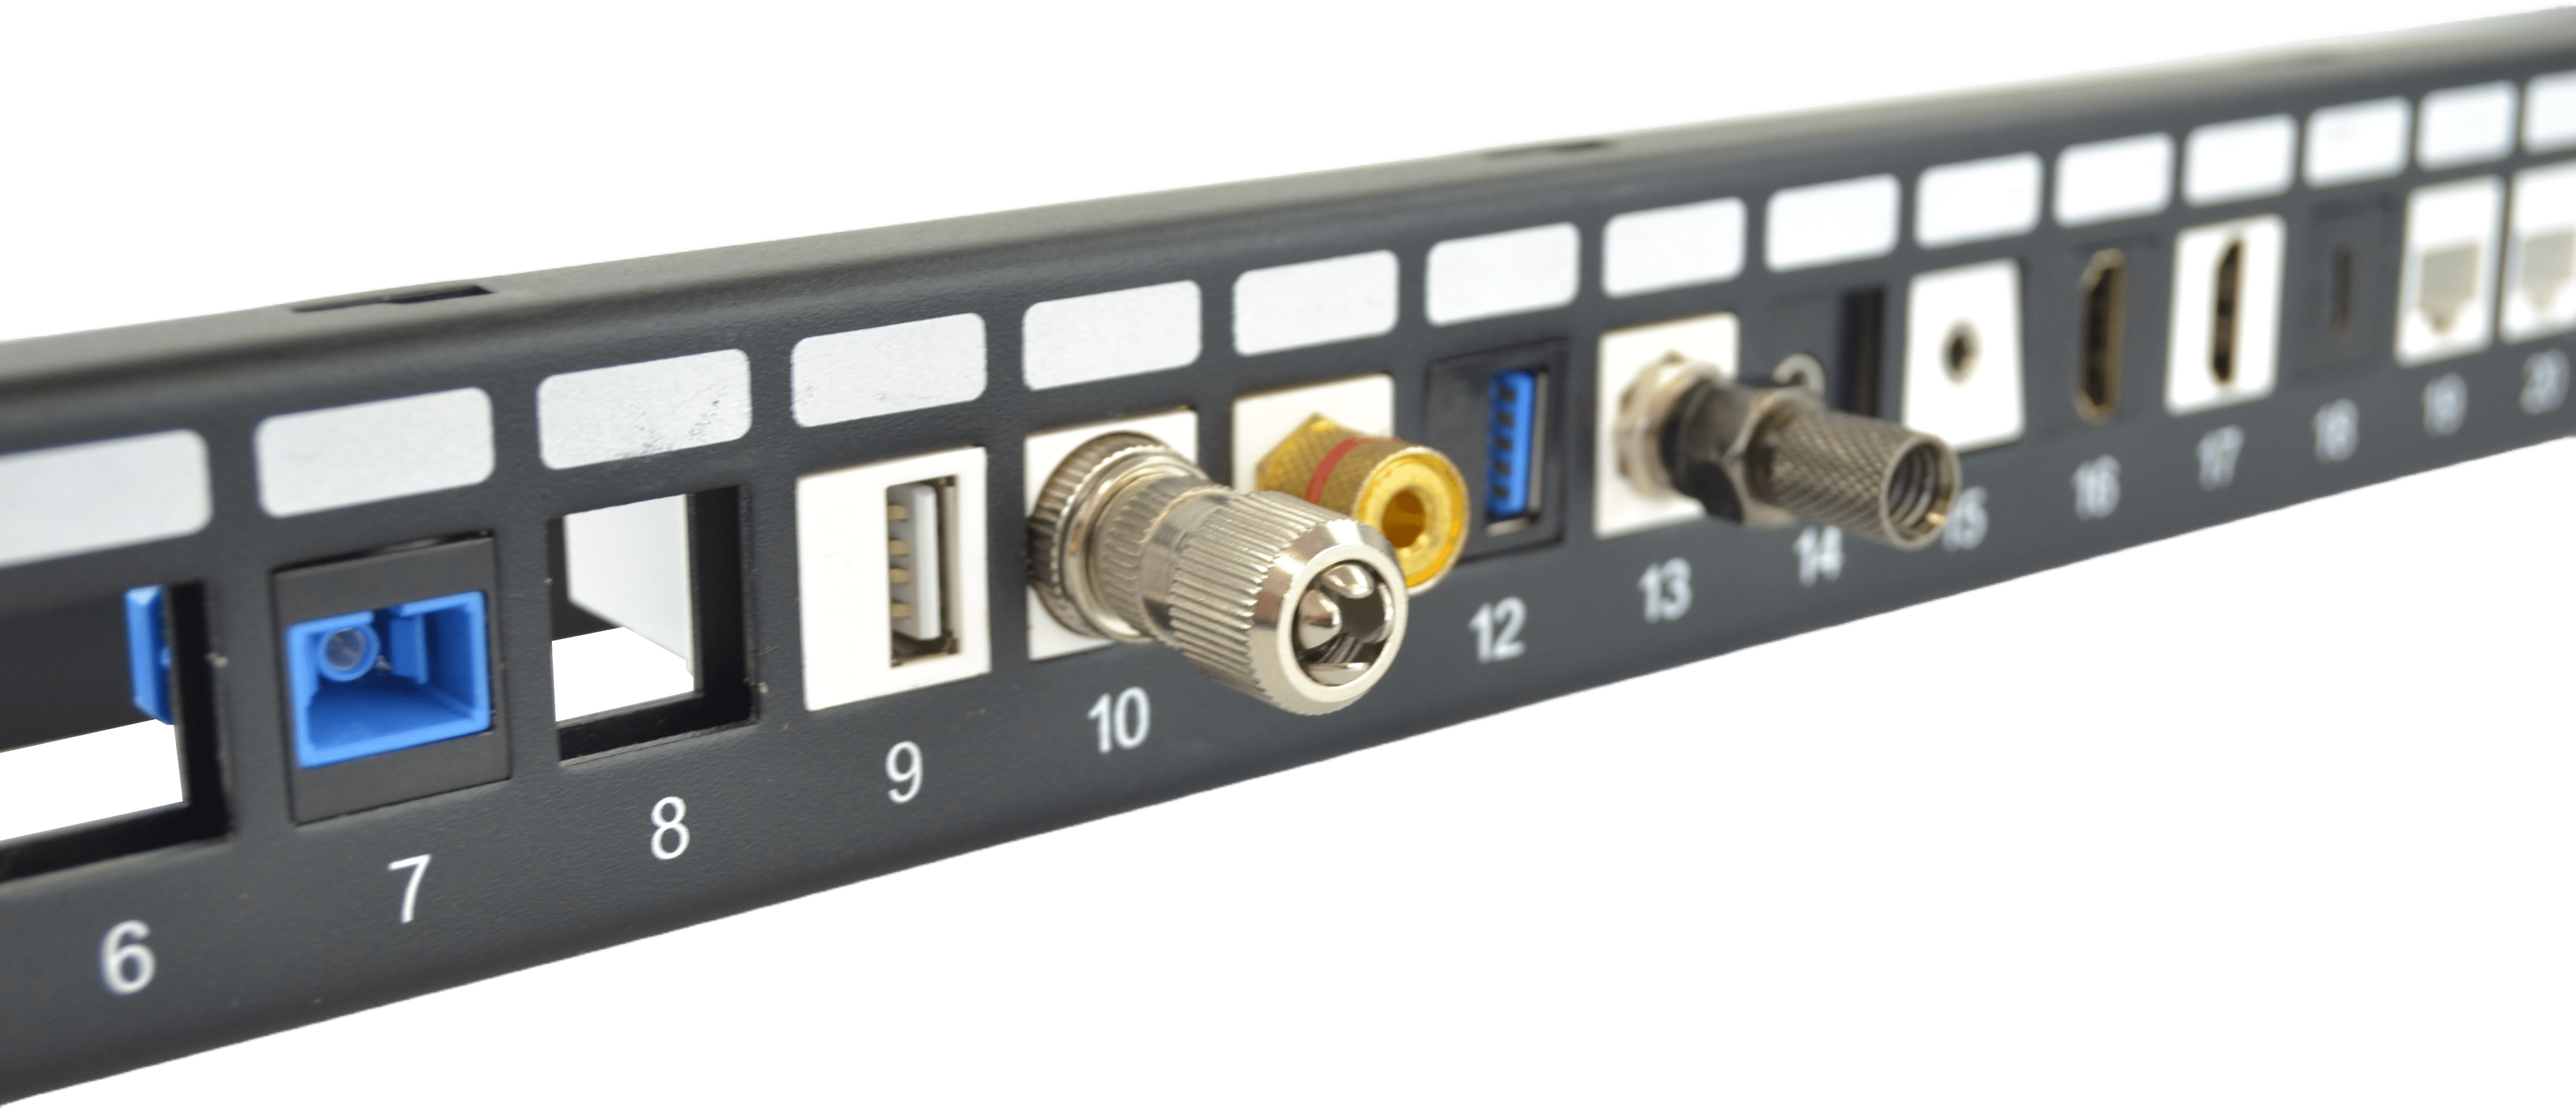 A Guide to Patch Panels and Keystone Inserts